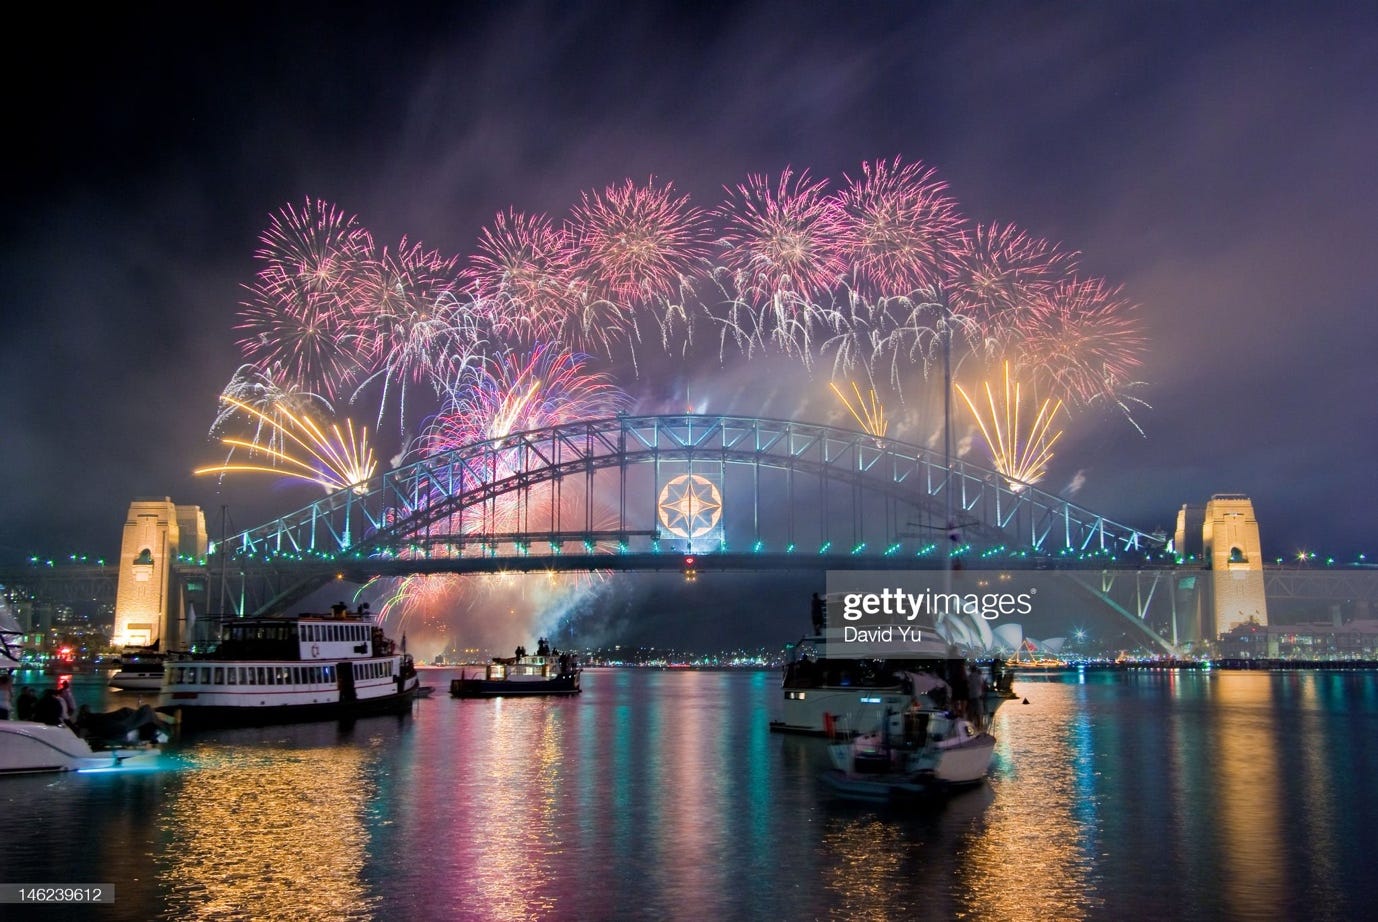 Fireworks over a bridge

Description automatically generated with medium confidence